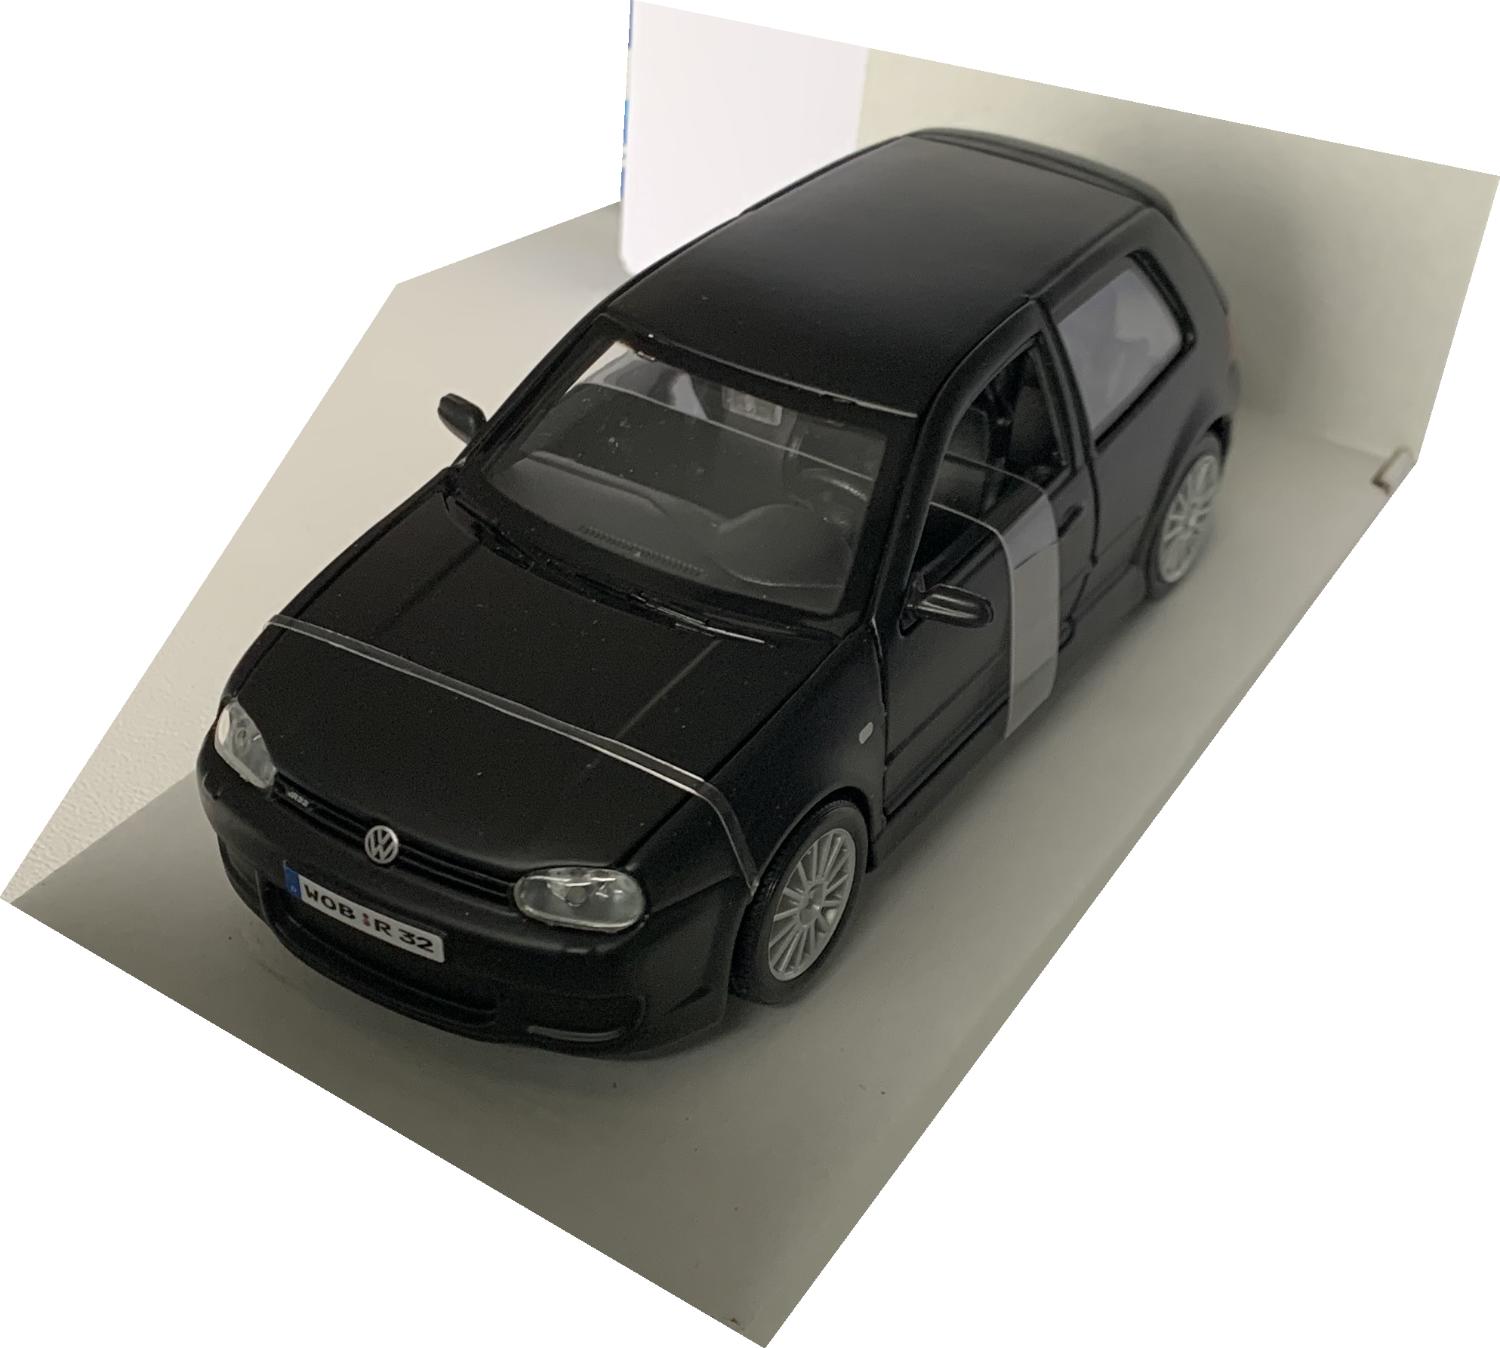 A good reproduction of the VW Golf R32 detail throughout, all authentically recreated. The model is presented in a window display box, the car is approx. 17 cm long and the presentation box is 23 cm long